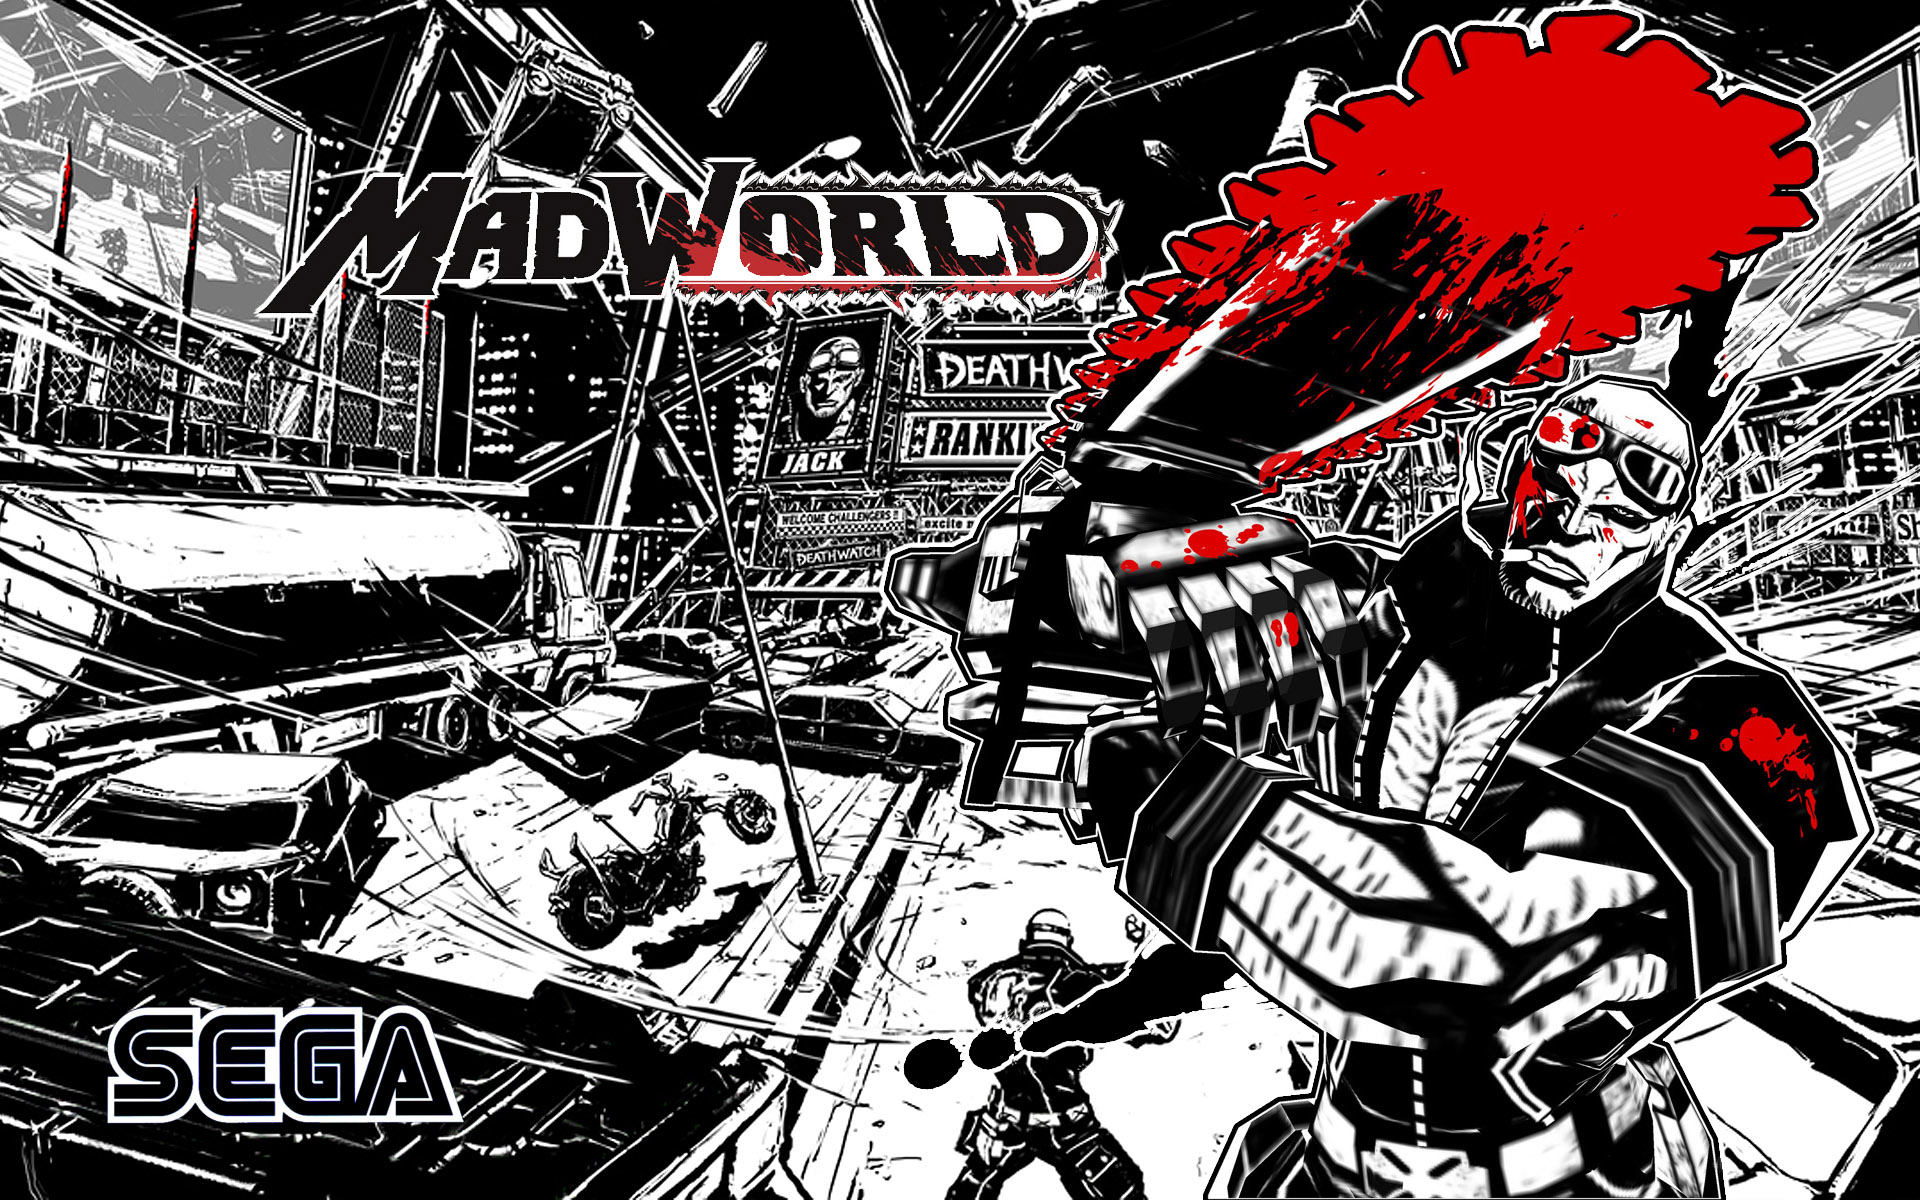 Madworld Video Game Quotes Imd